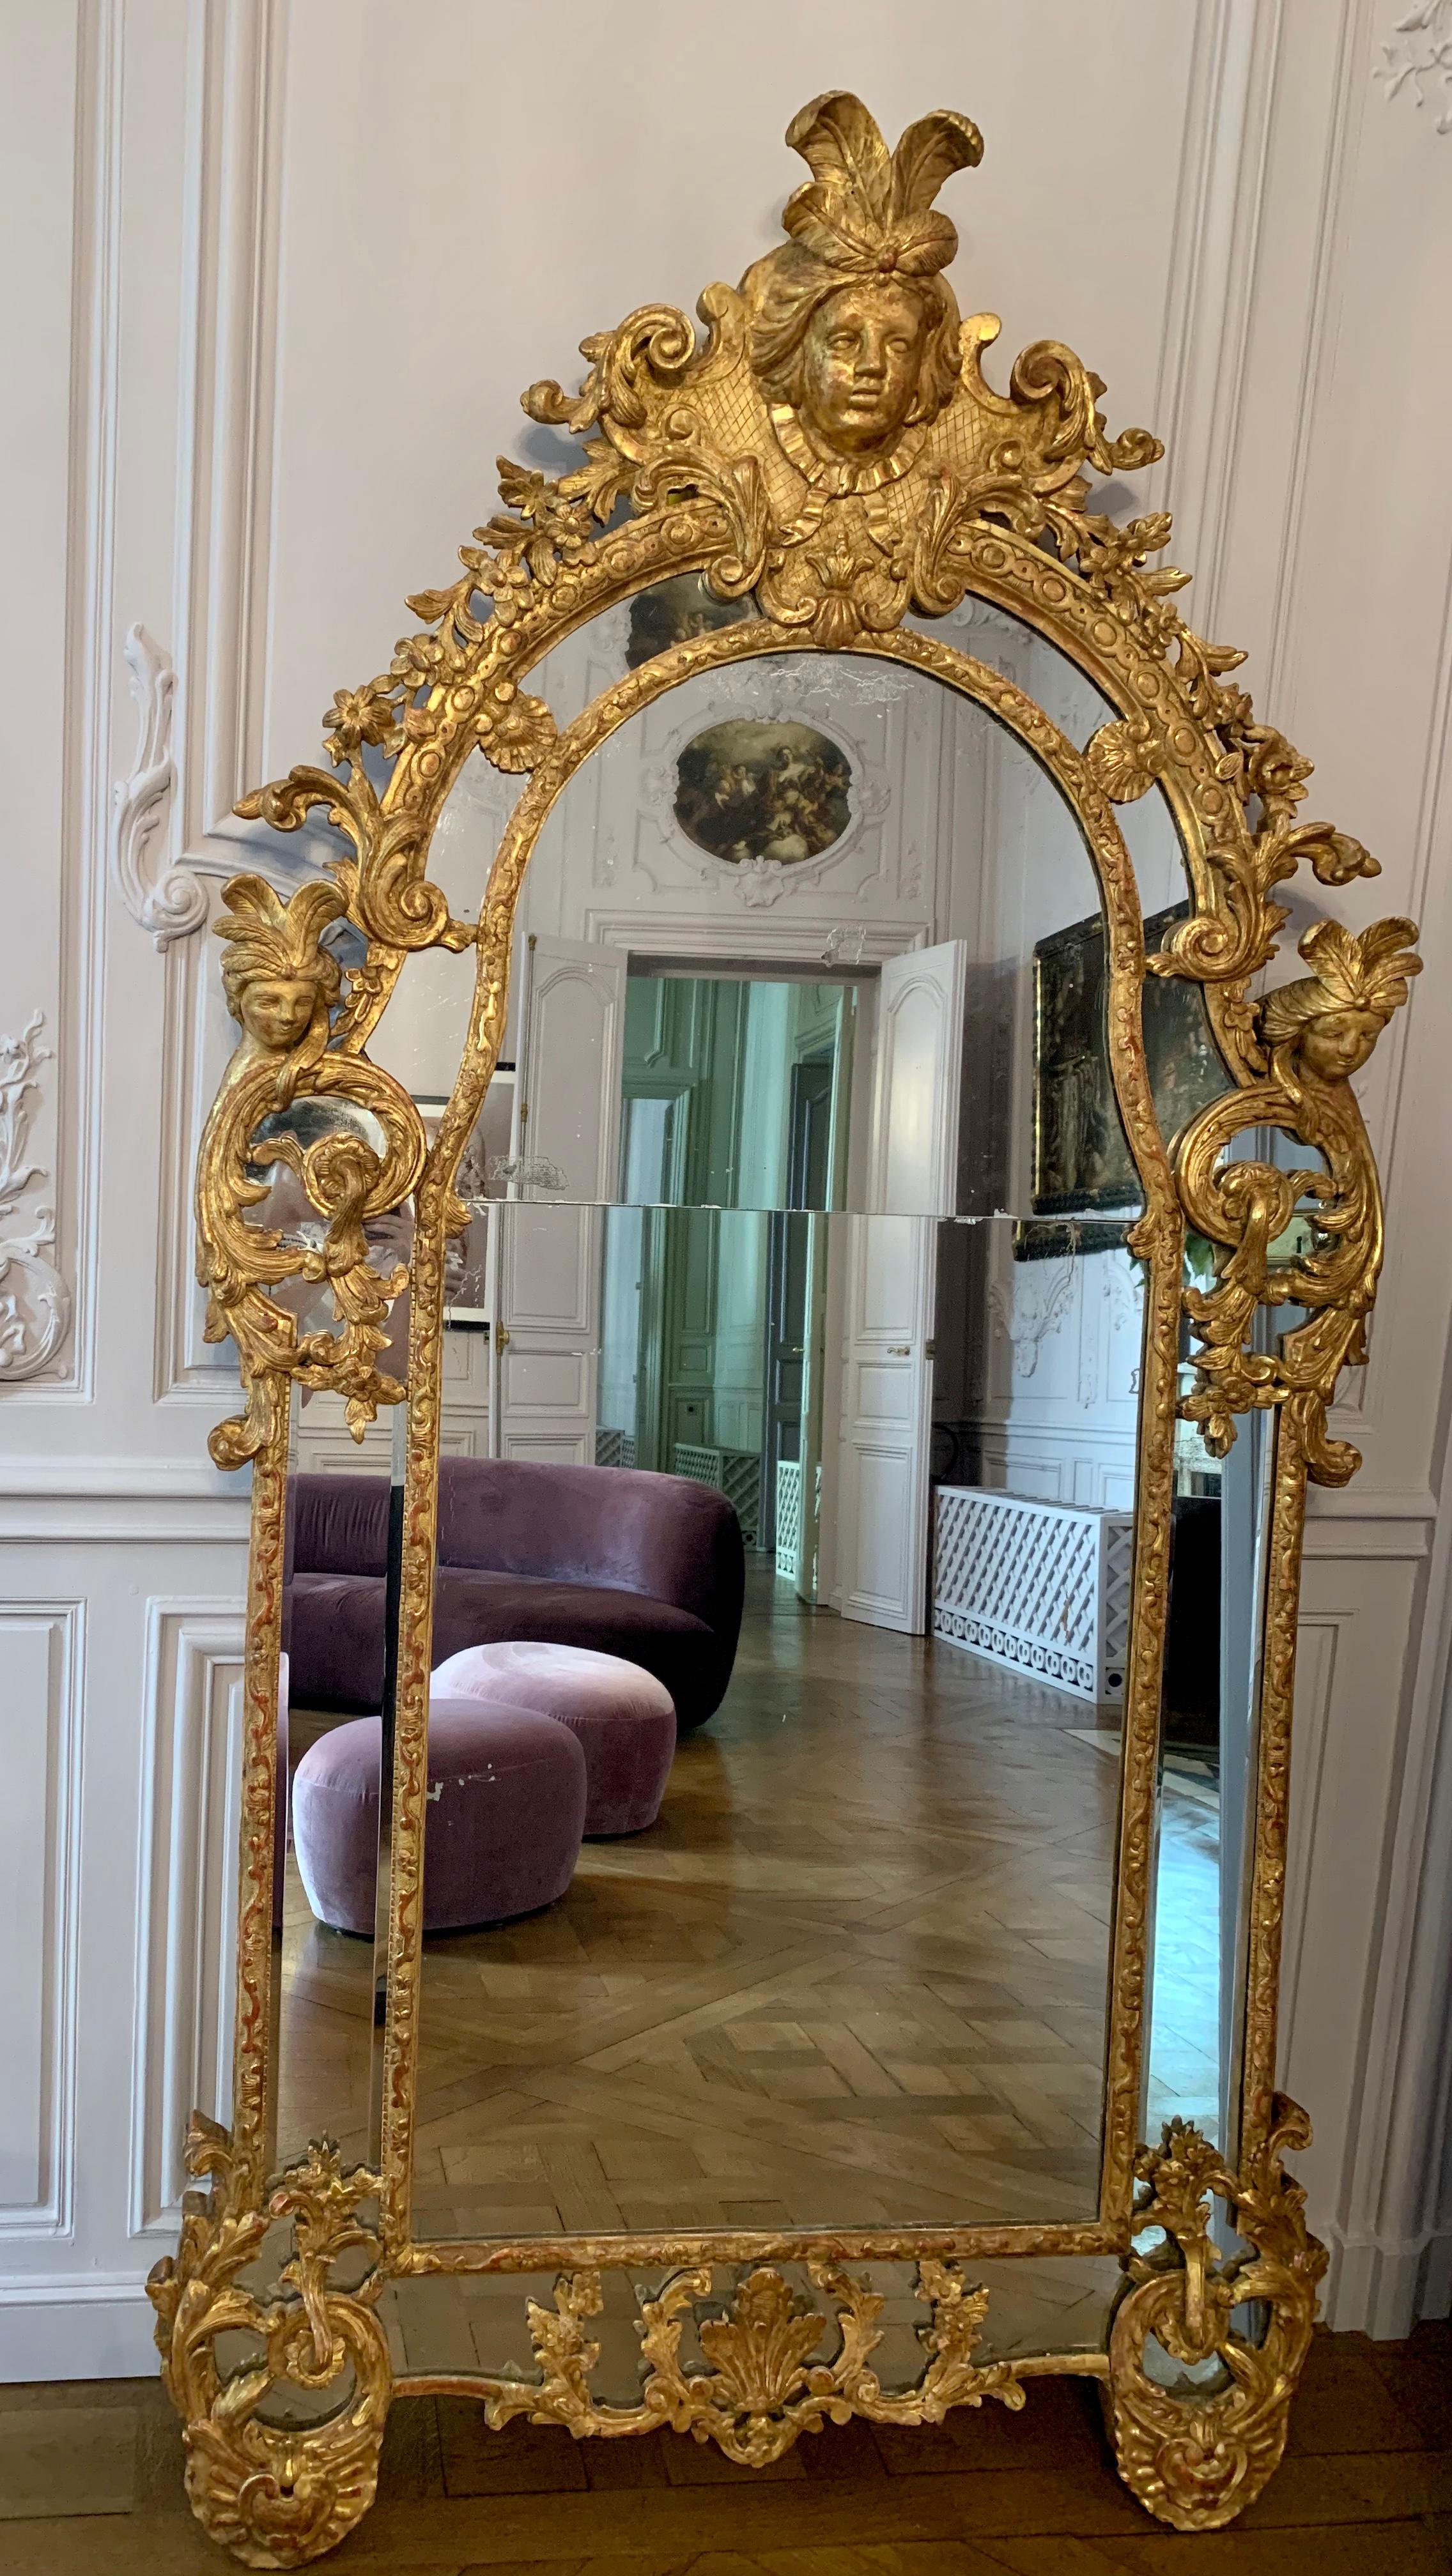 A beautiful and large Regence gilt-beechwood mirror, circa 1720, in beautiful conditions. From a unique private mansion in Switzerland, re-designed in 2005-2007 by François-Joseph Graf.

The Régence was the period in French history between 1715 and